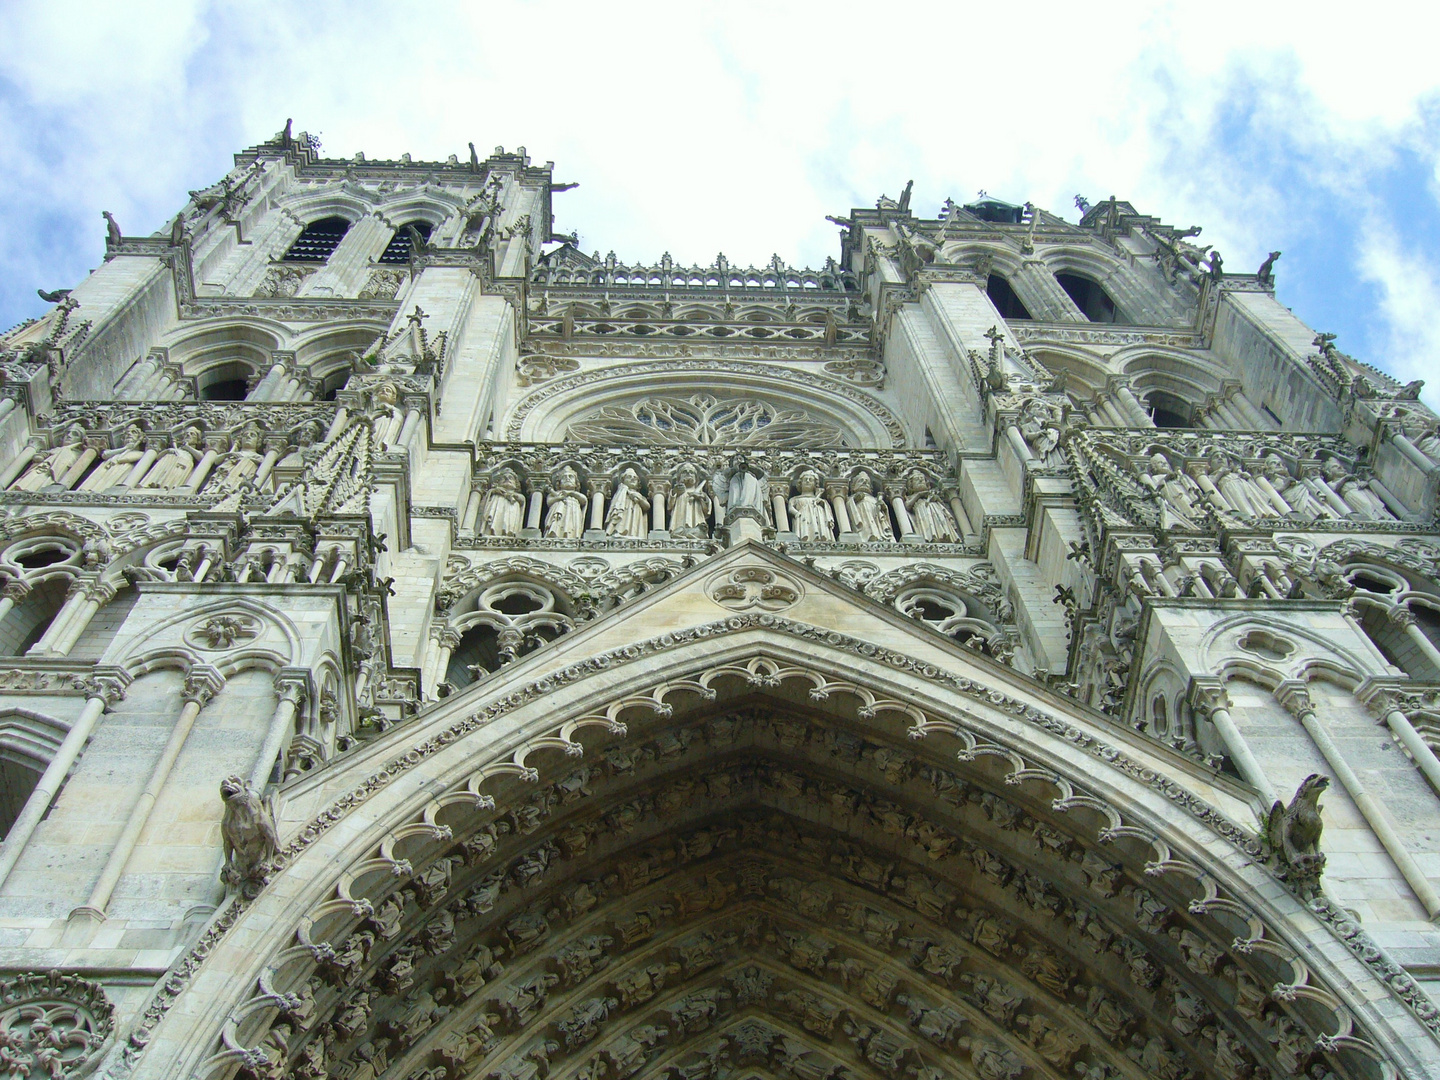 Cathedrale Amiens